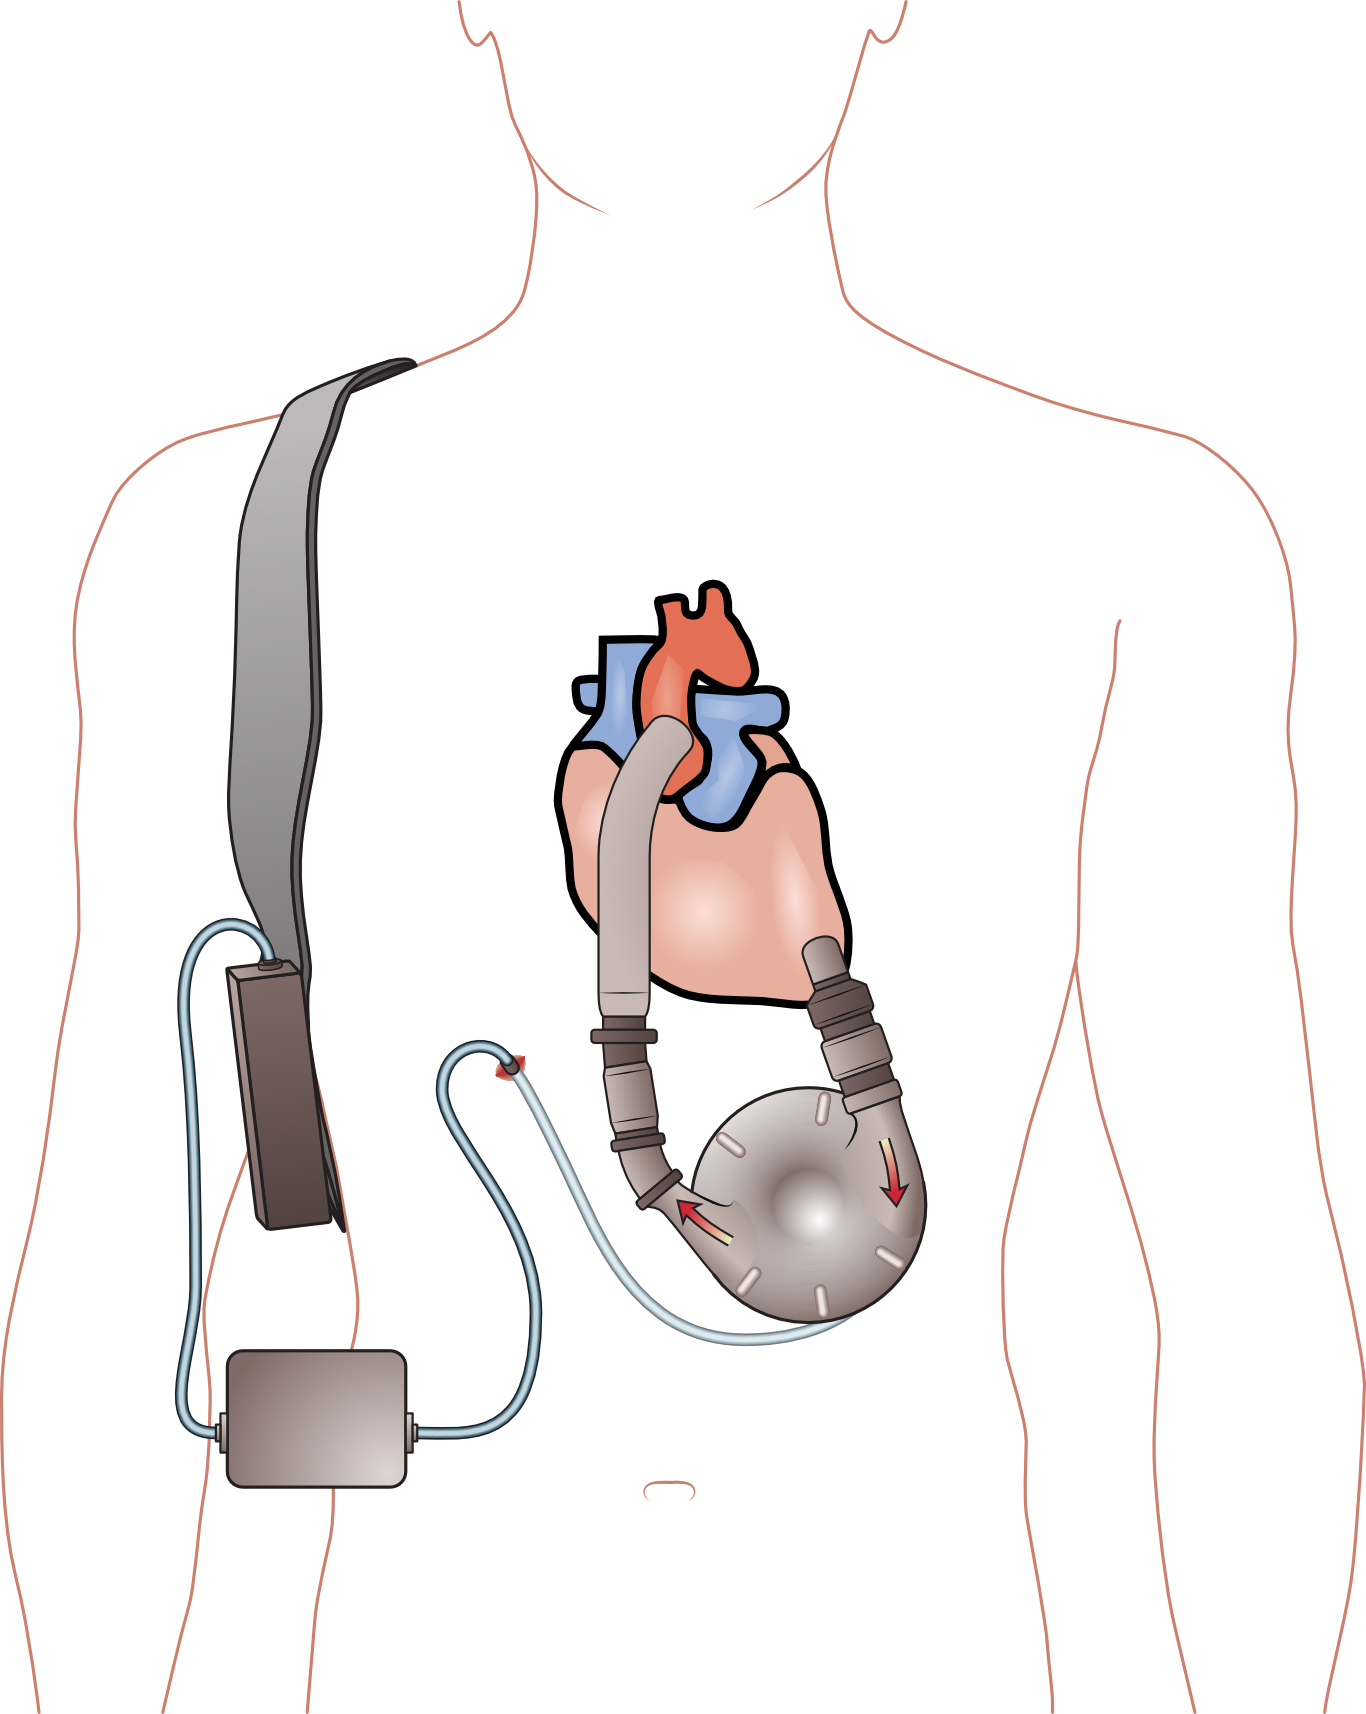 ventricular assist device